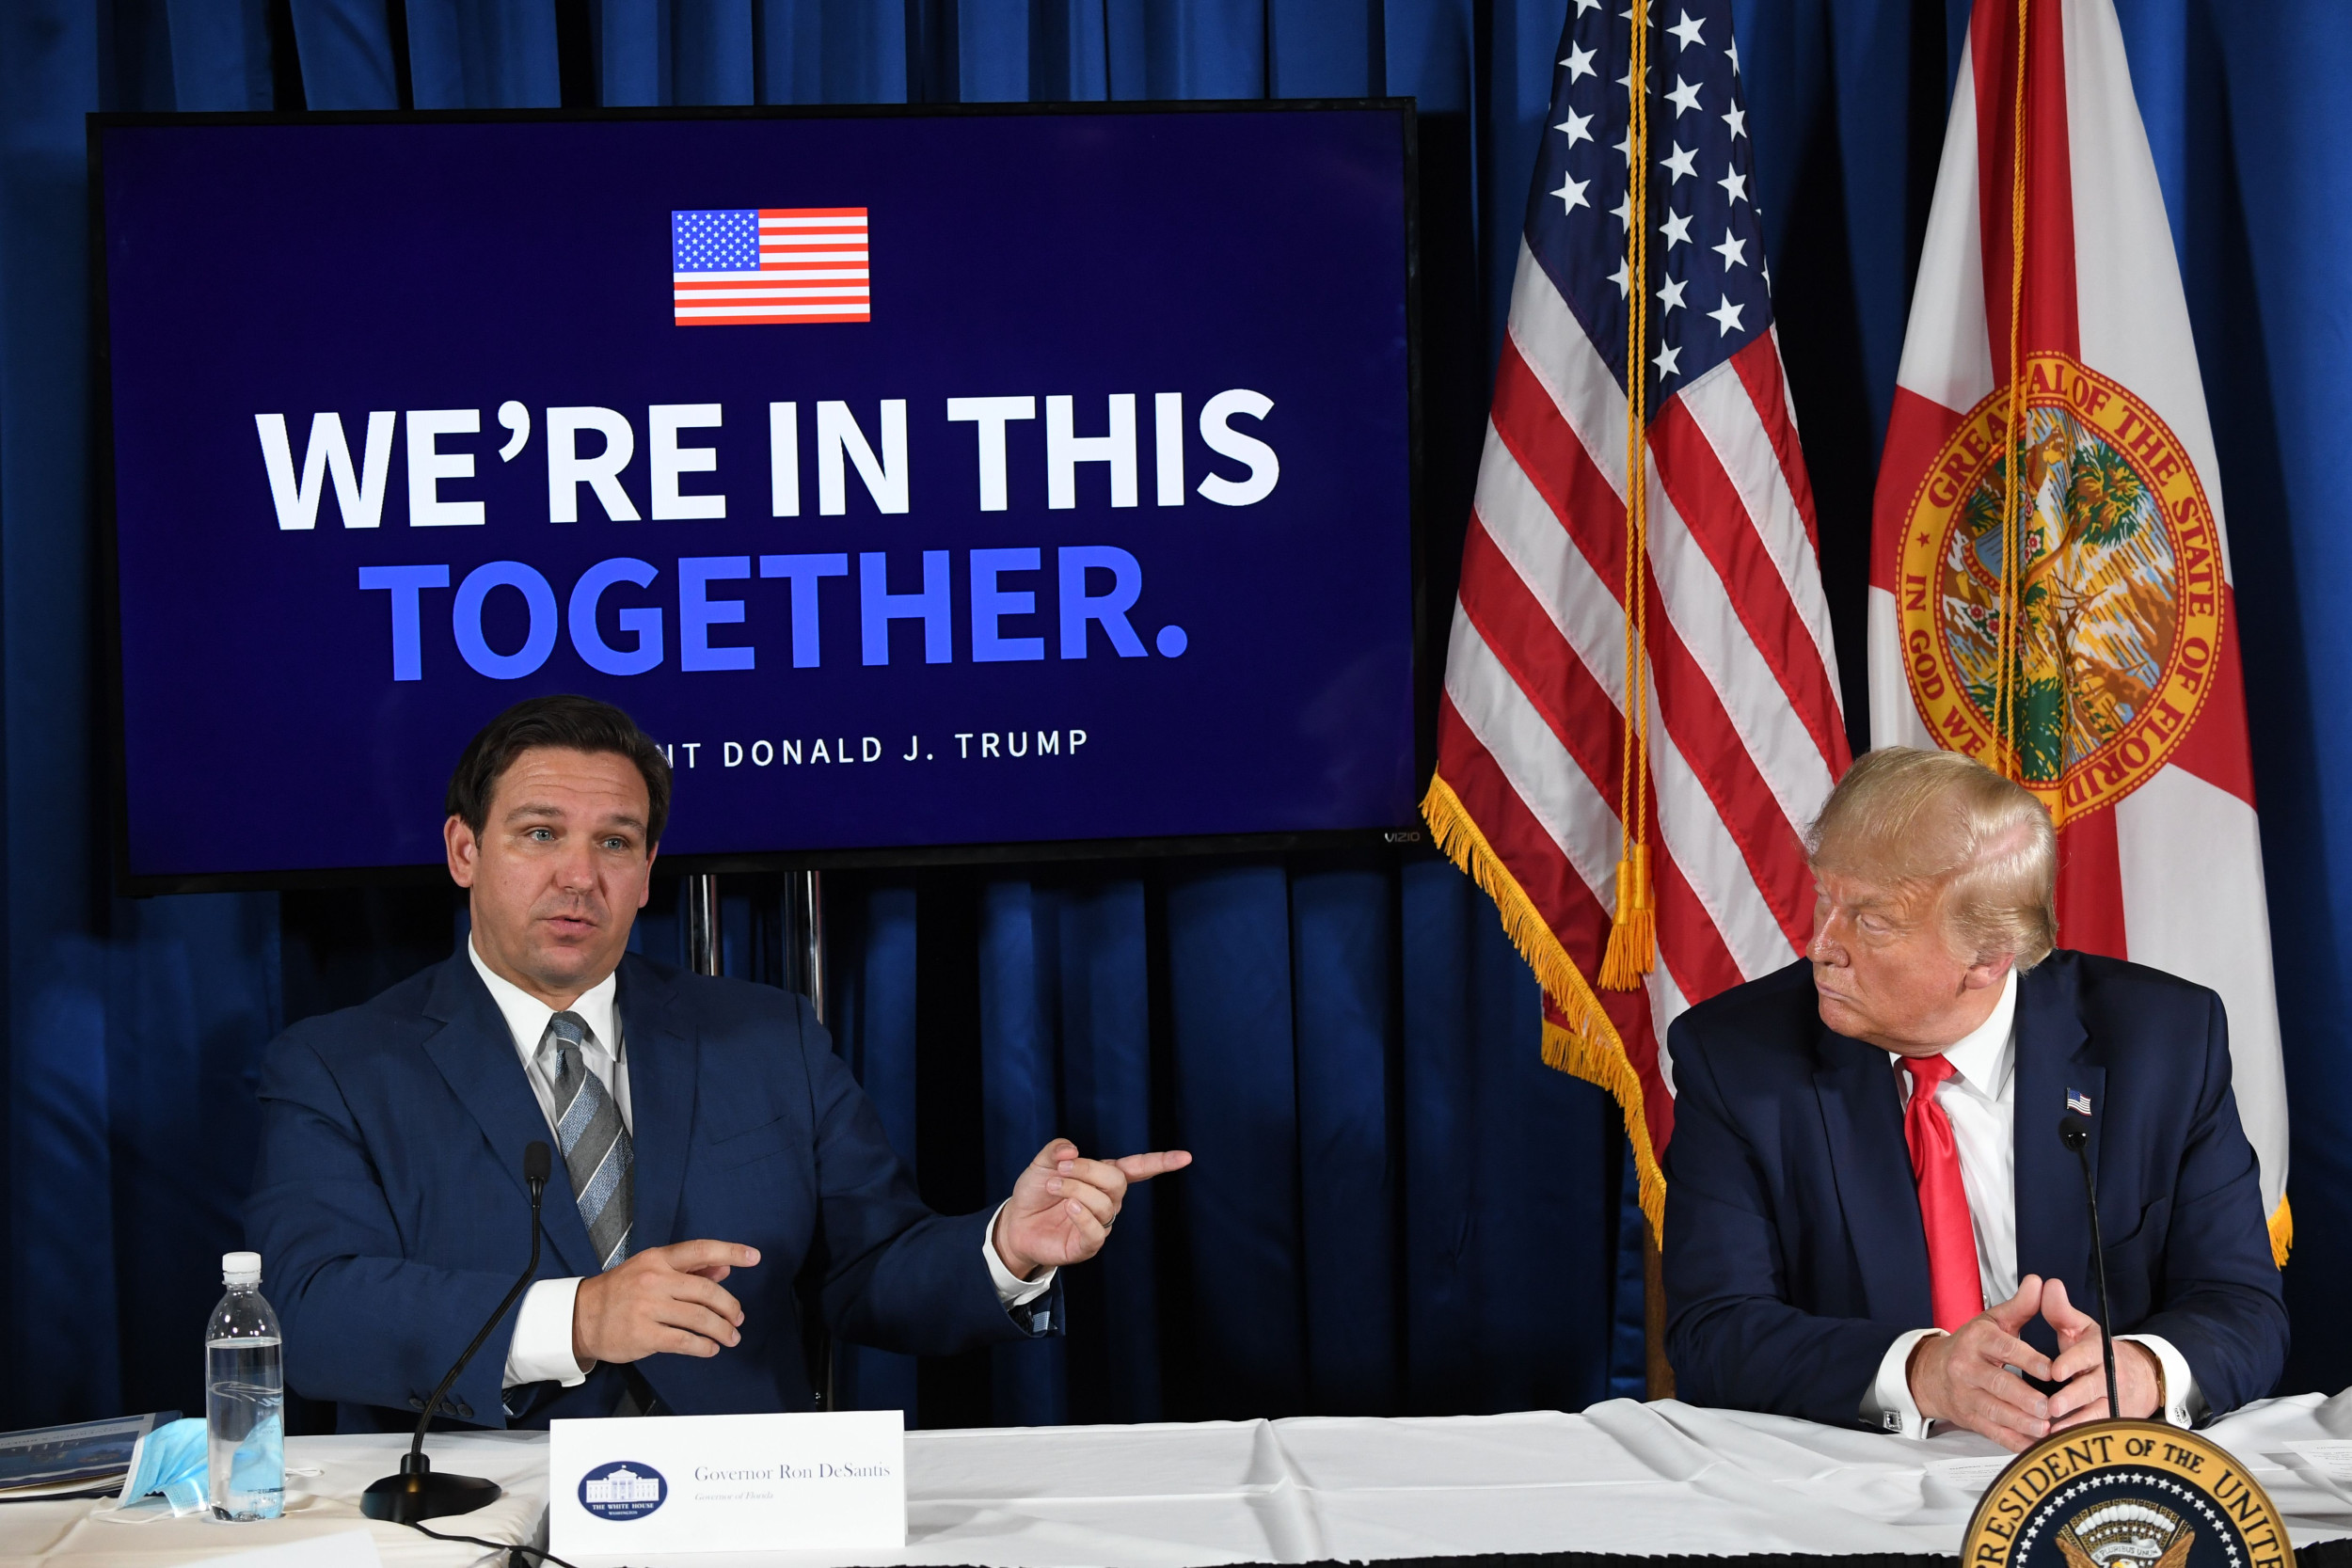 Trump and DeSantis wage war about issues almost nobody cares about